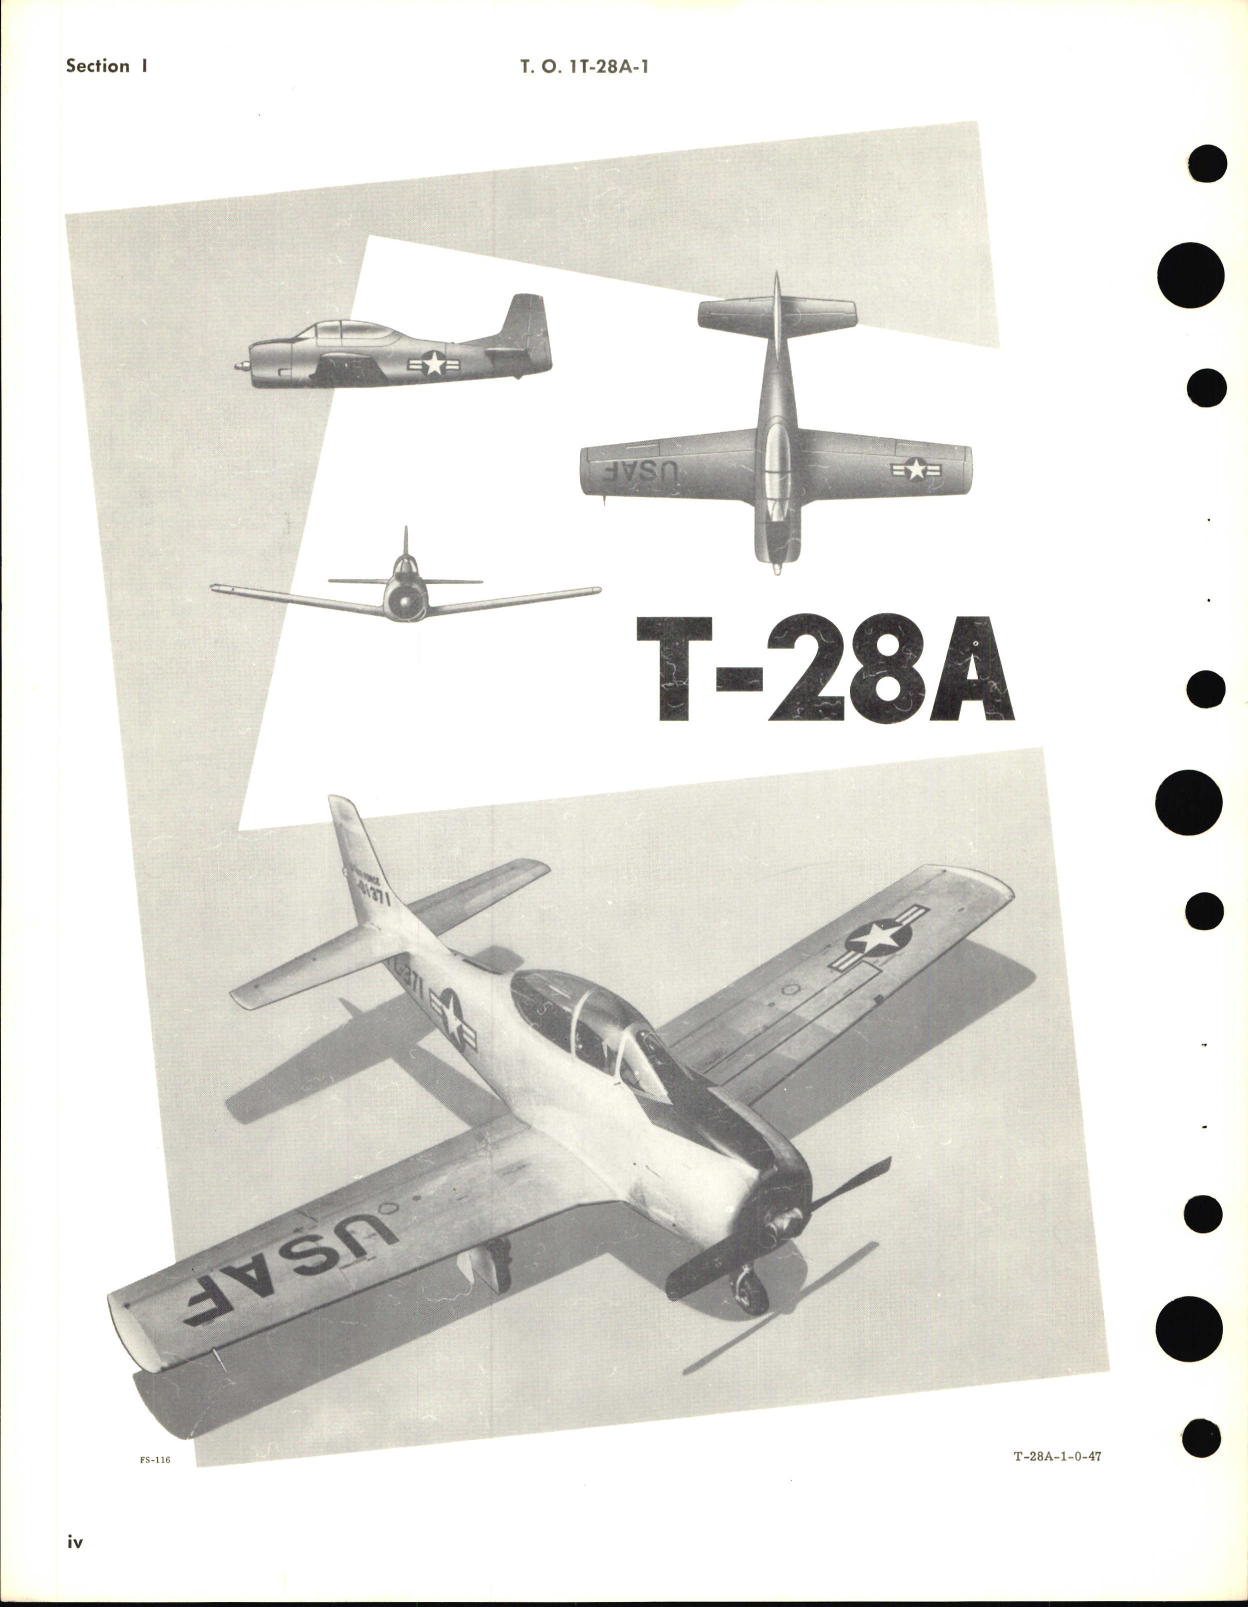 Sample page 6 from AirCorps Library document: Flight Manual for T-28A and T-28D